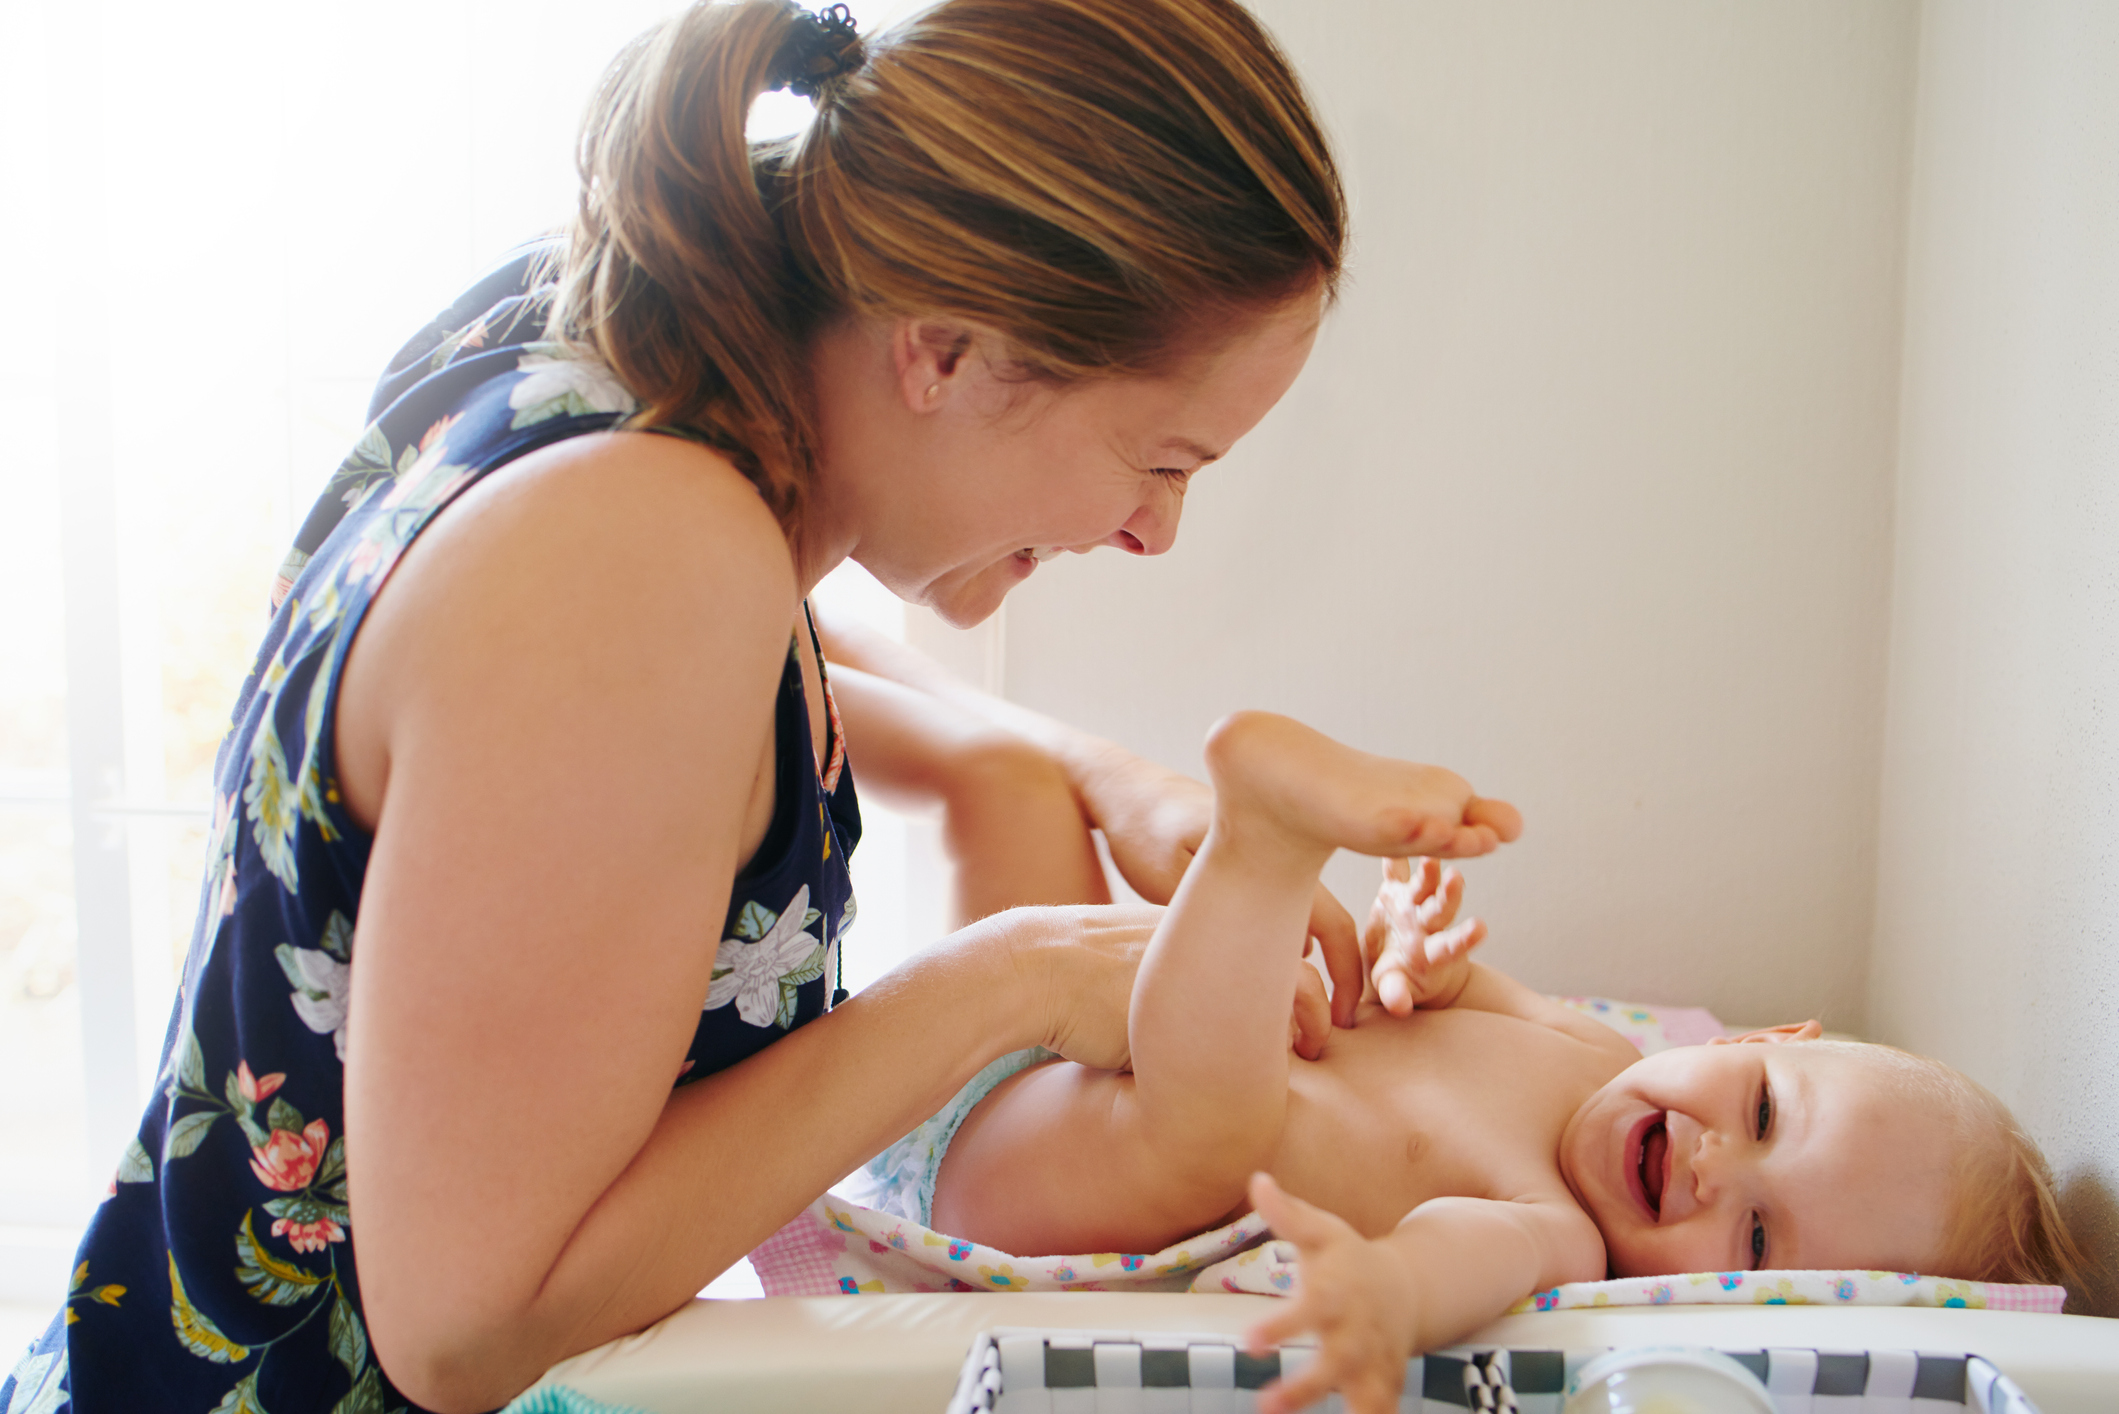 A woman tickles her baby on the changing table